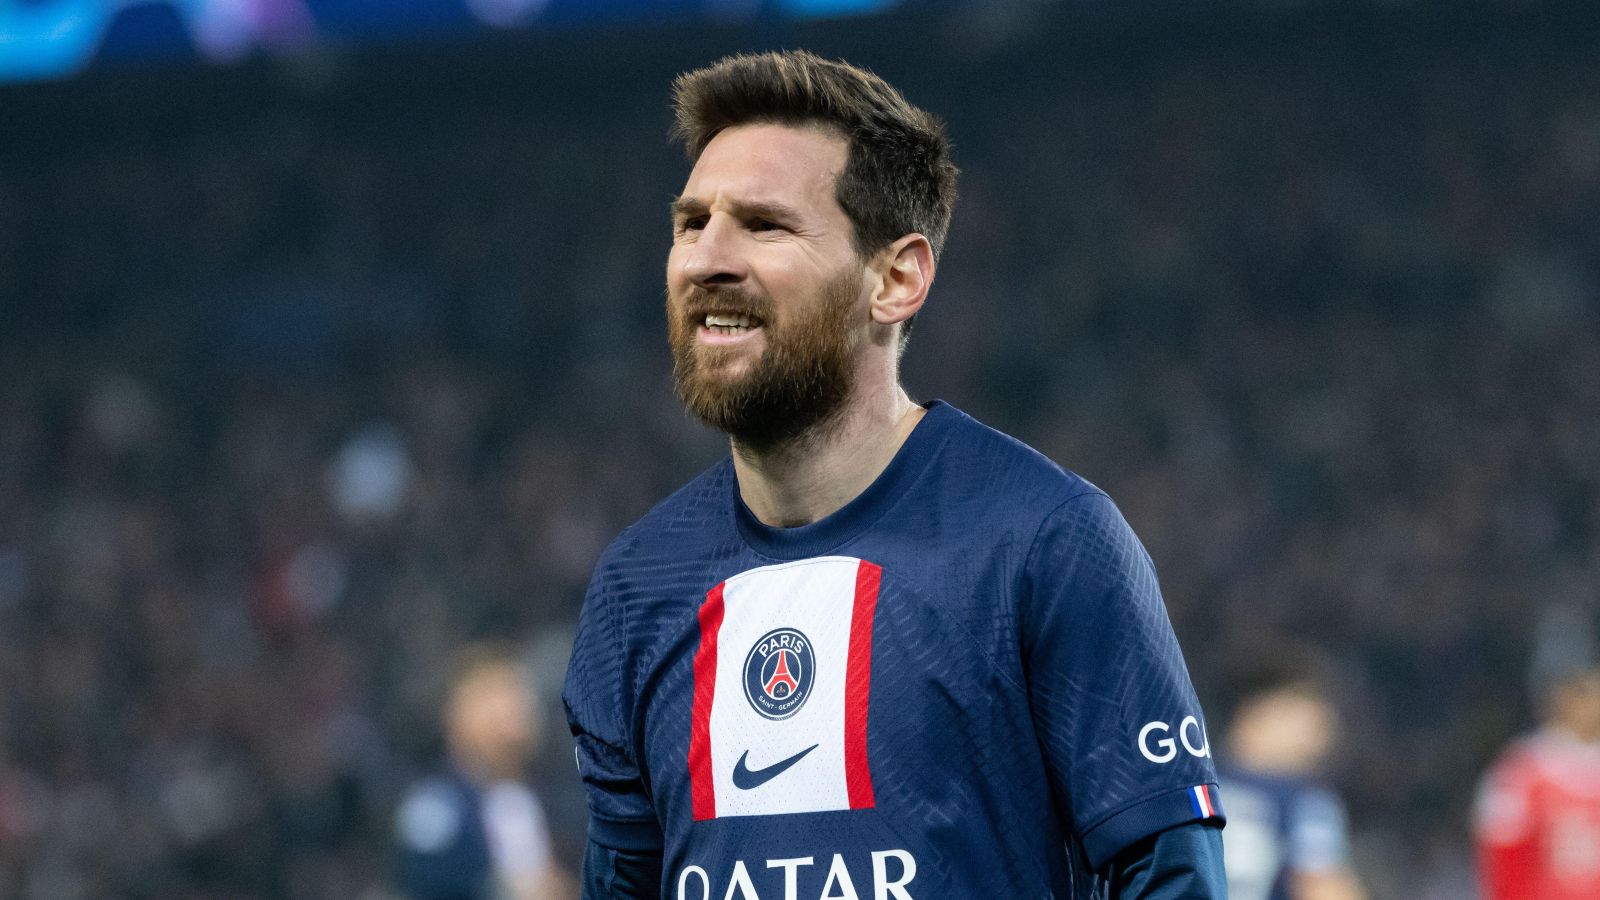 Messi ‘in talks’ over £320m deal to join Ronaldo as PSG reach verdict on World Cup winner’s contract